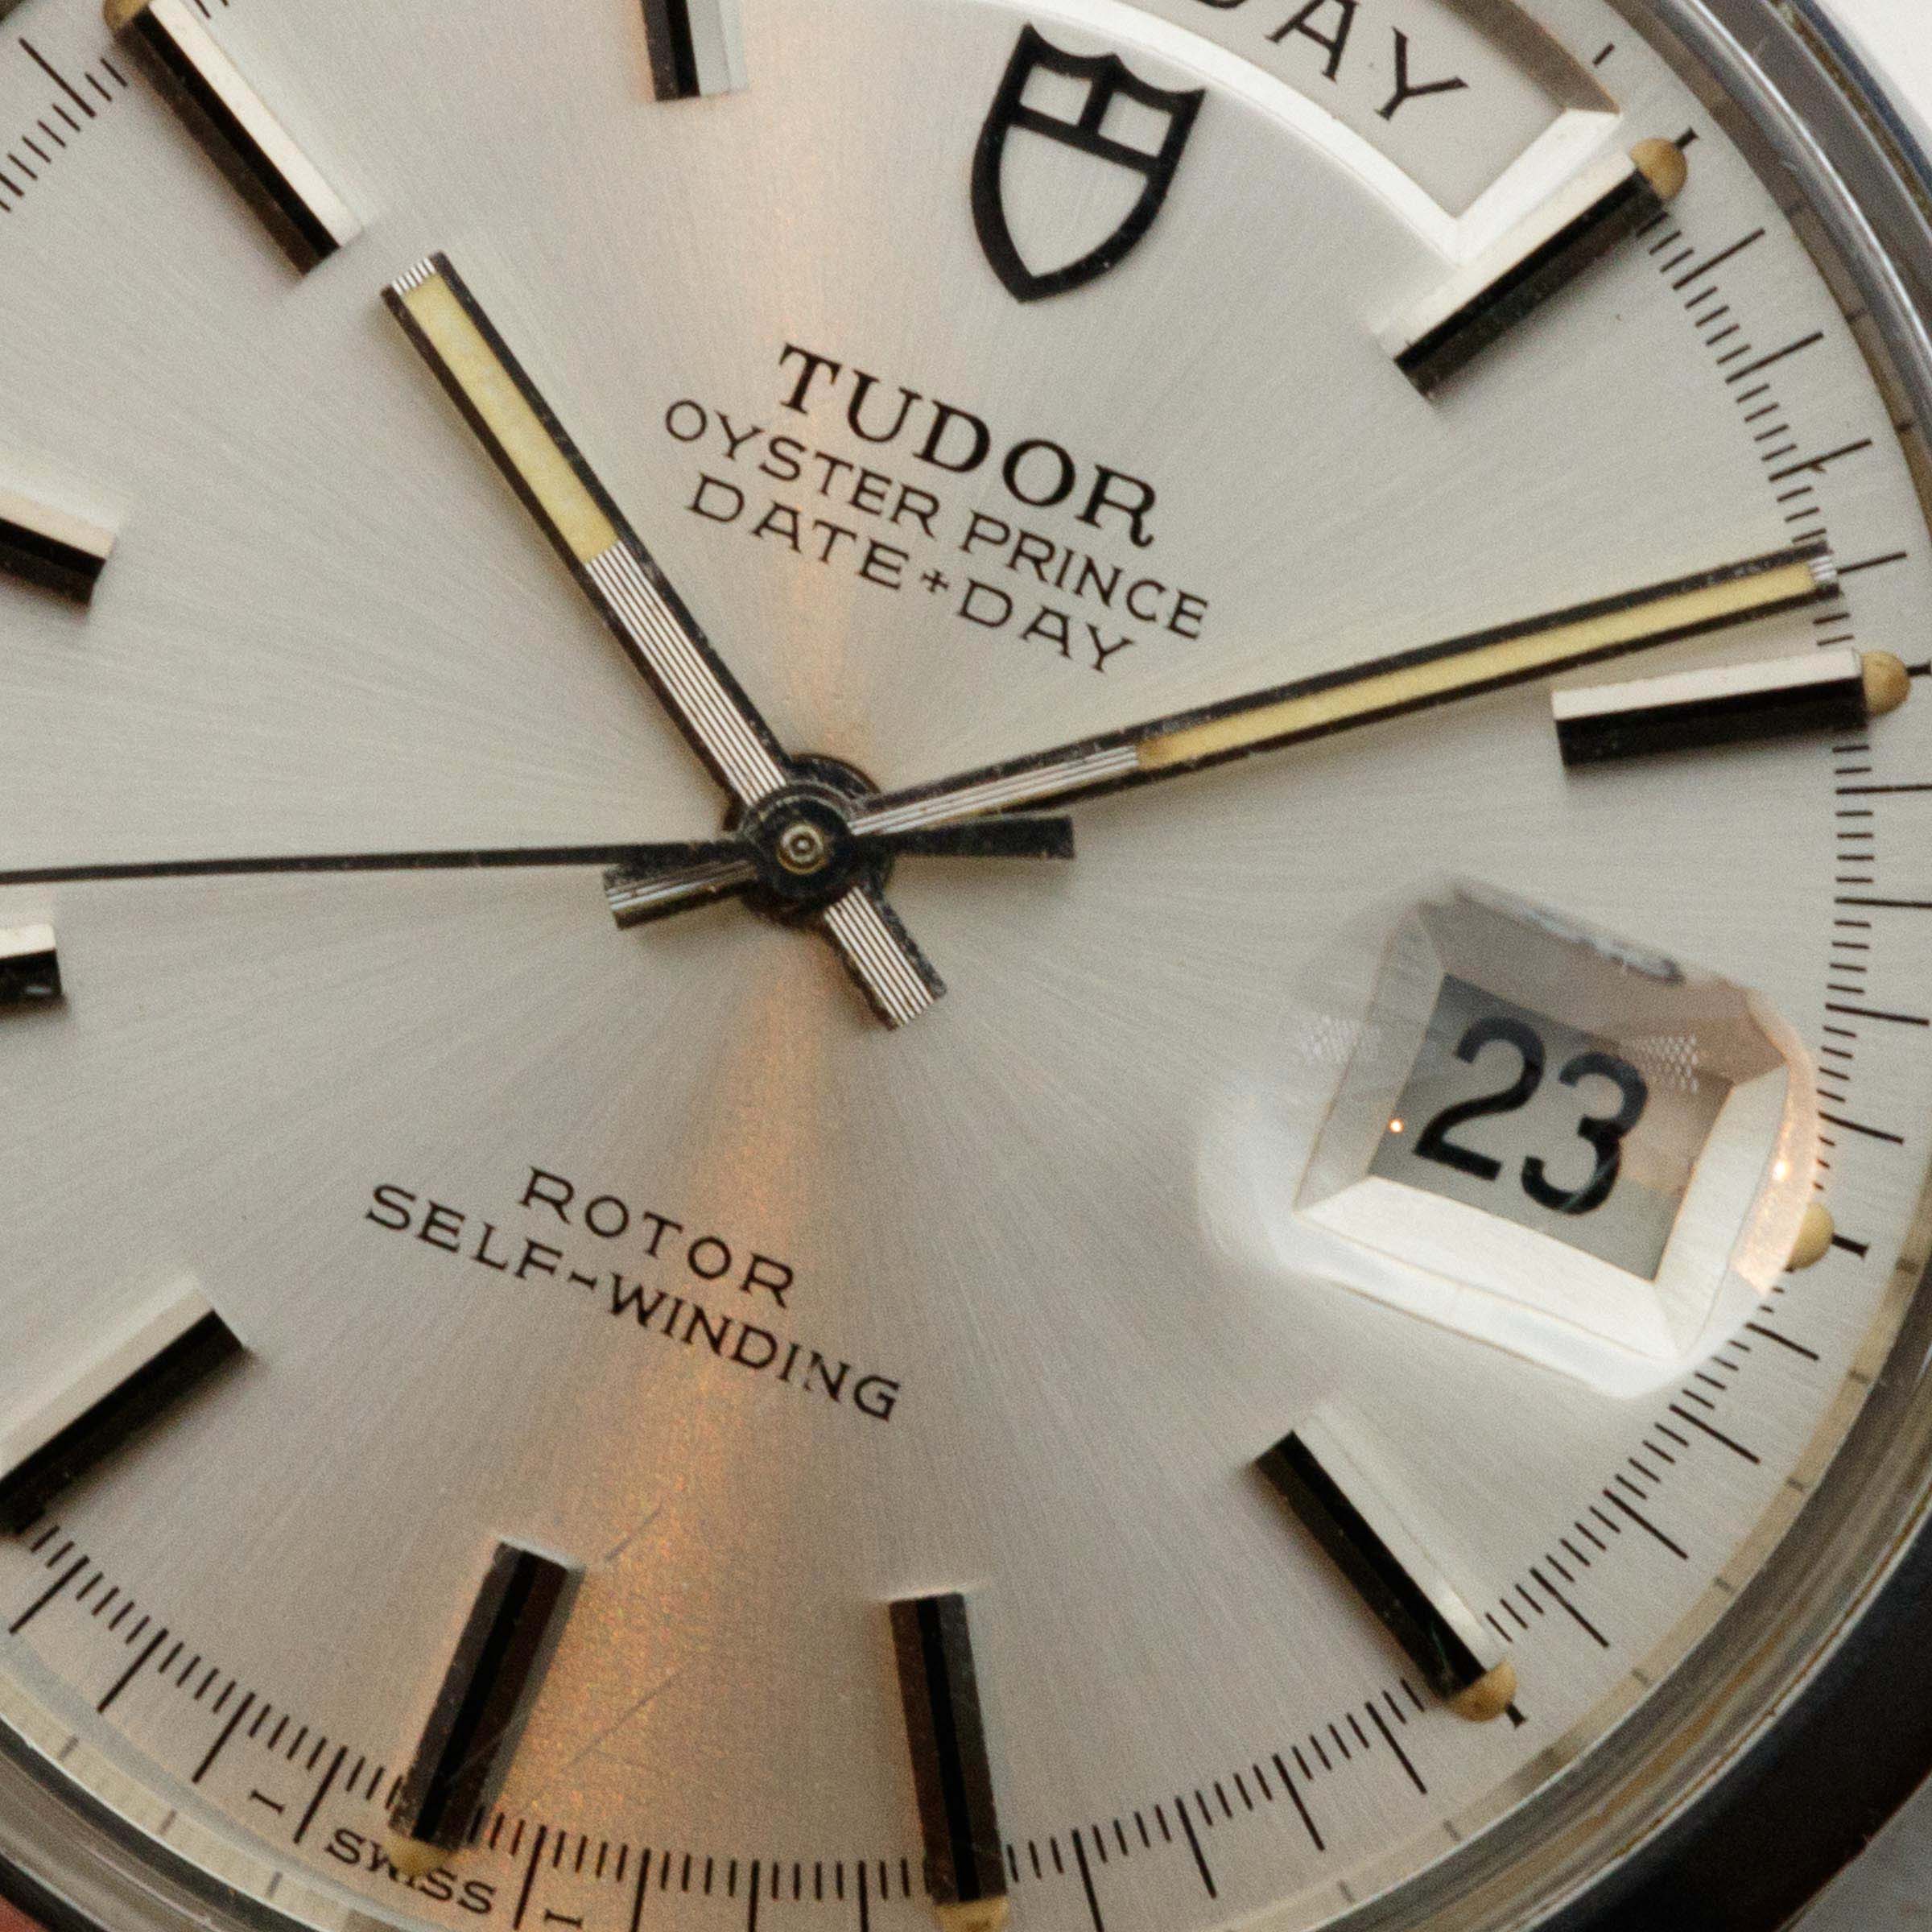 Tudor Oyster Prince Date-Day 70170 | Auctions | Loupe This